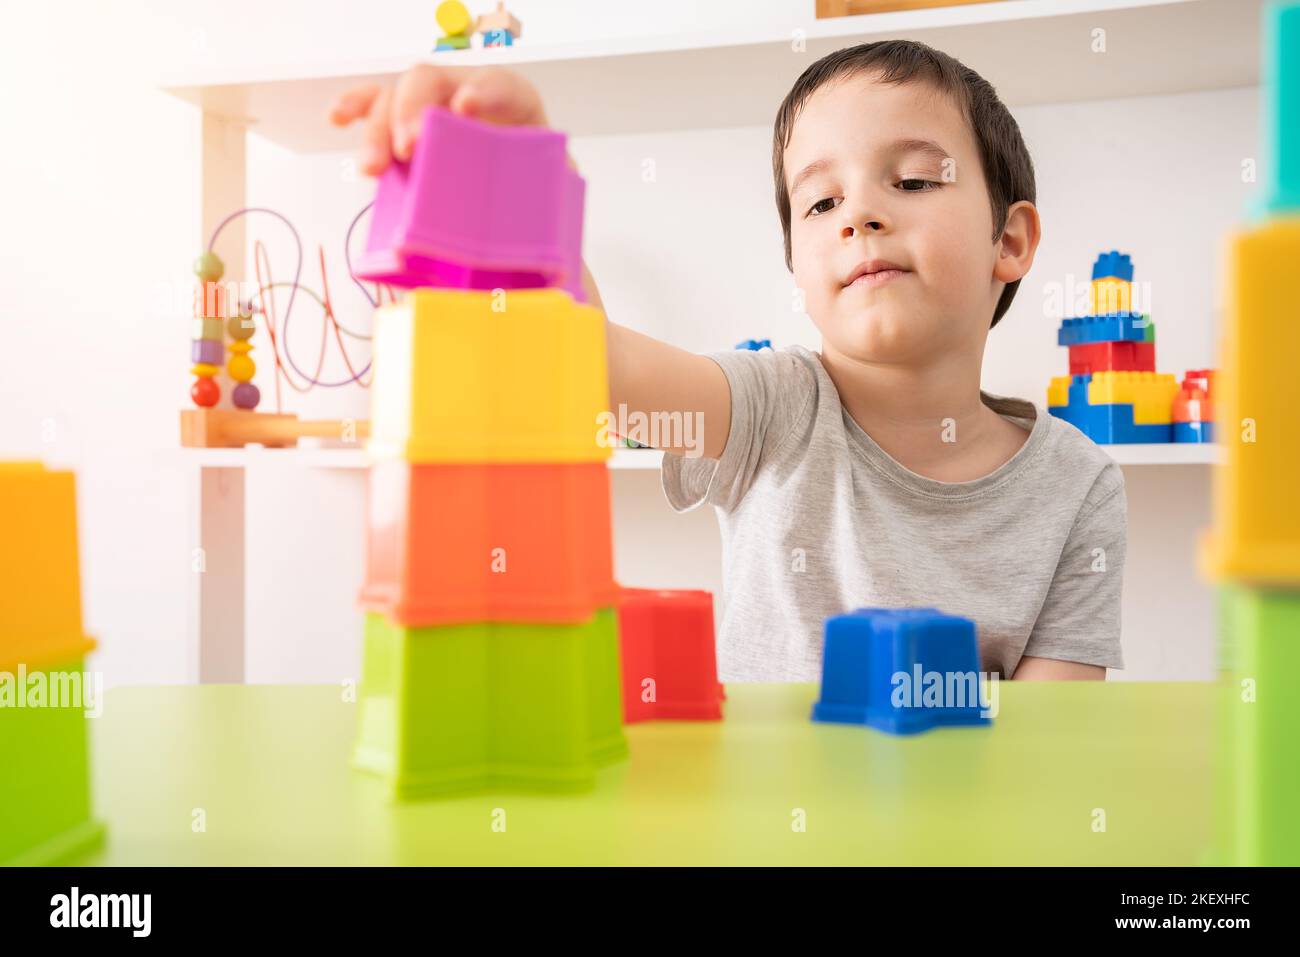 The building blocks of my future. An interested pre-school child building something with plastic blocks. Stock Photo